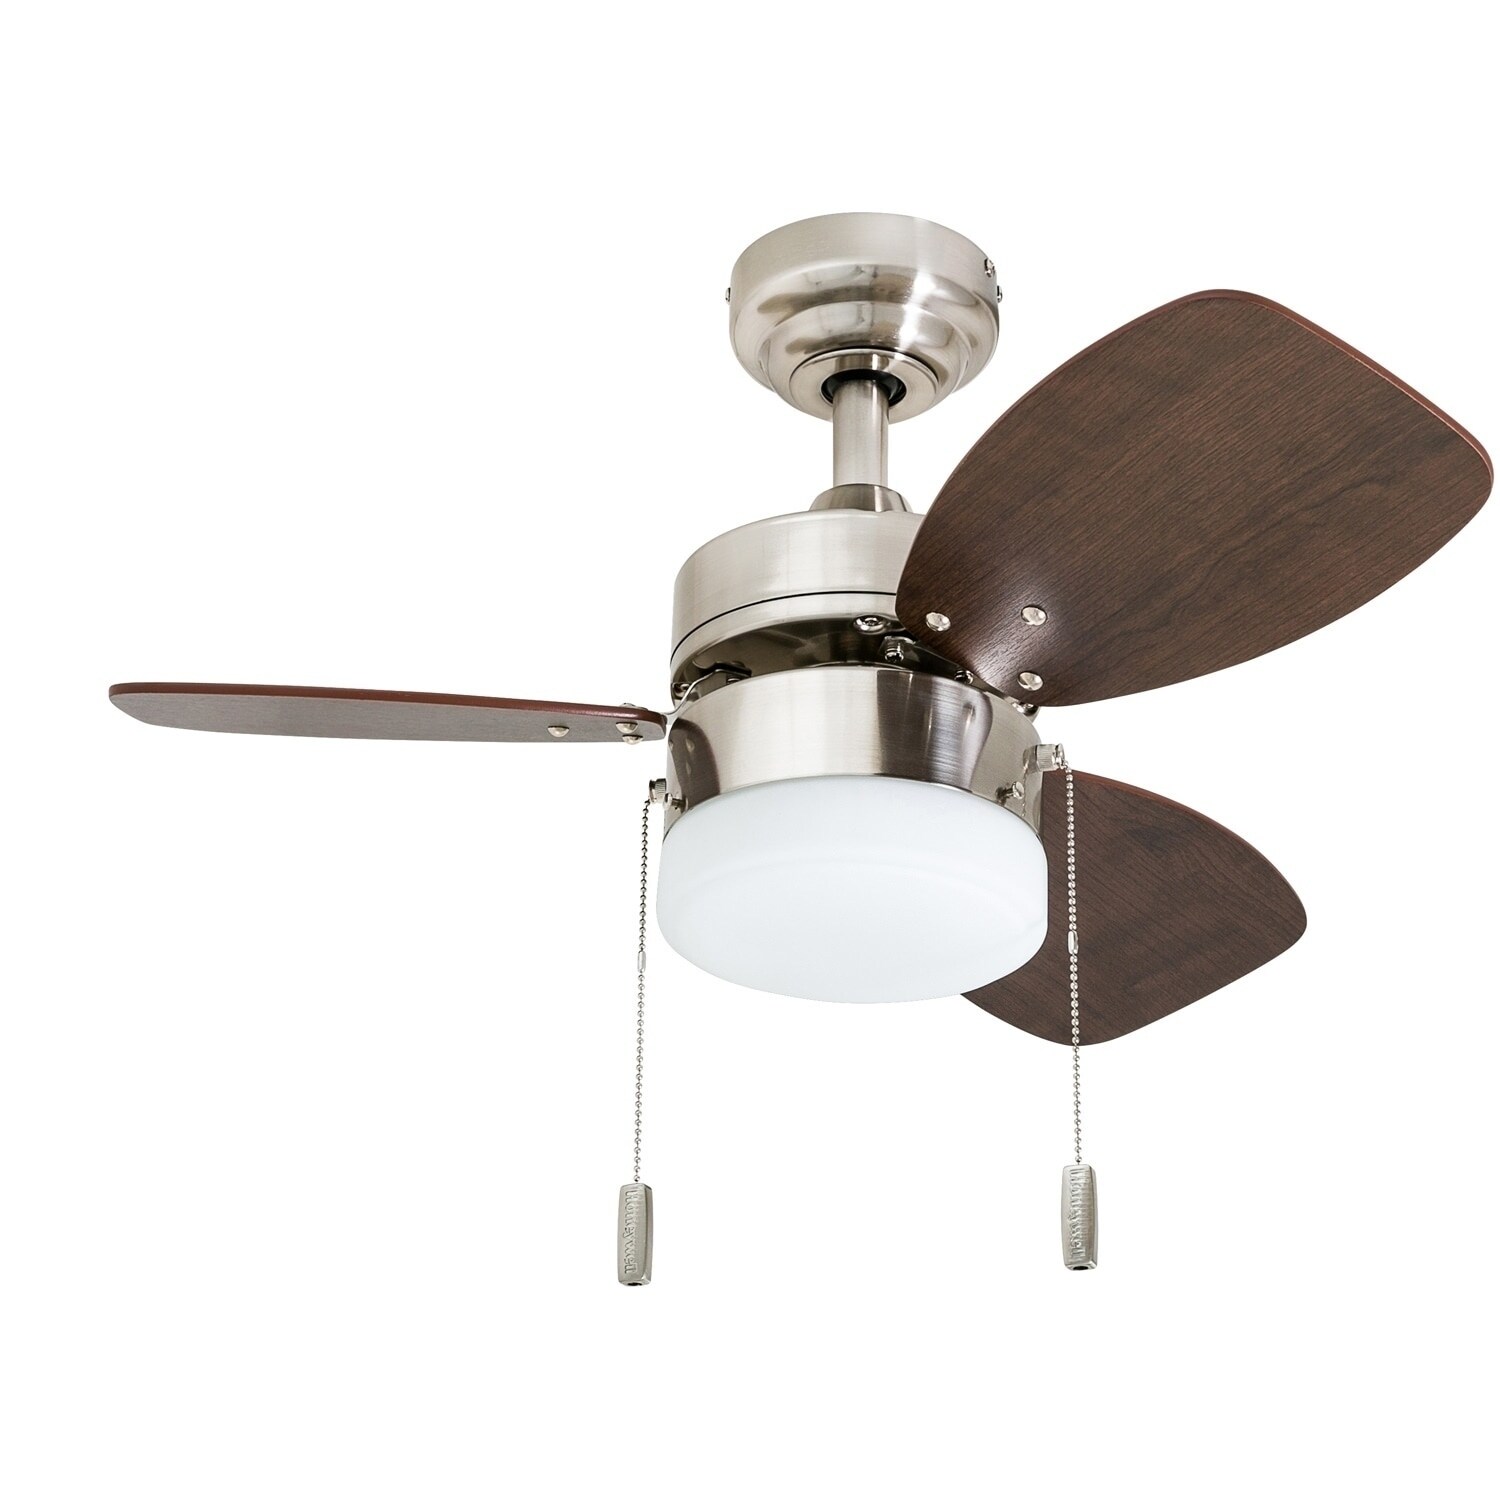 Honeywell Ocean Breeze 30 Brushed Nickel Small Led Ceiling Fan With Light